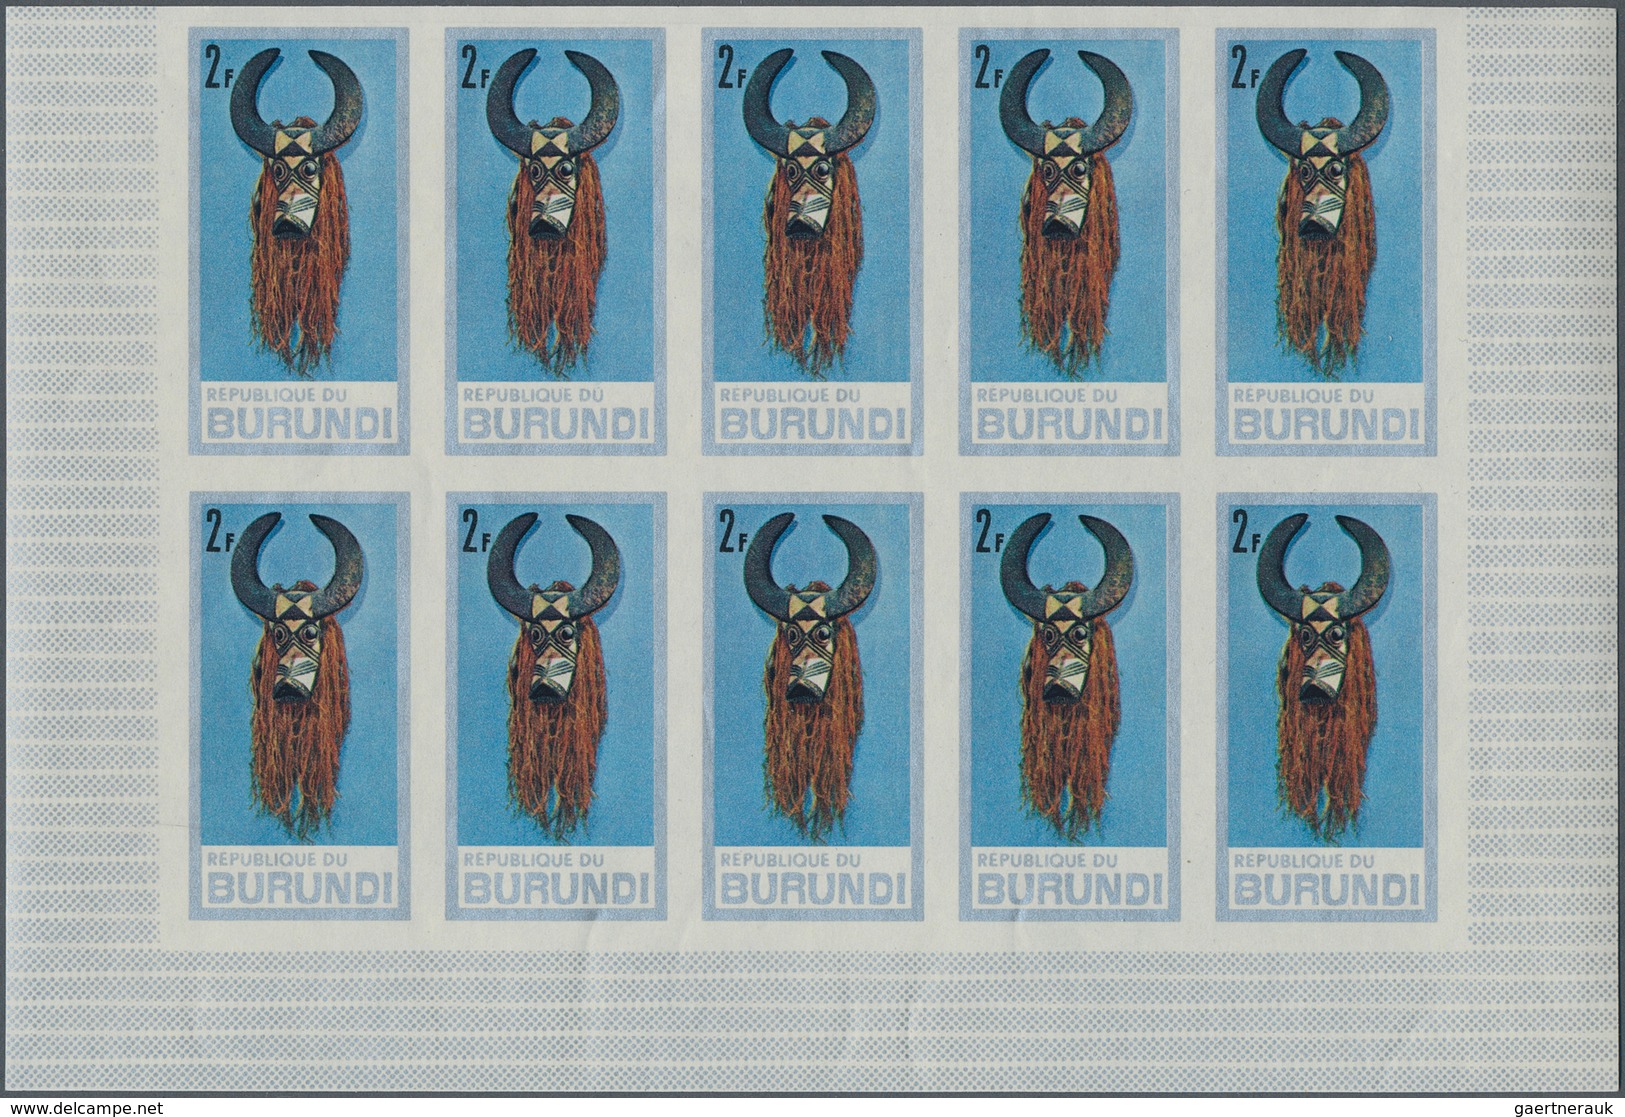 Burundi: 1966/1970, Lot Of 5756 IMPERFORATE (instead Of Perforate) Stamps MNH, Showing Various Topic - Collections